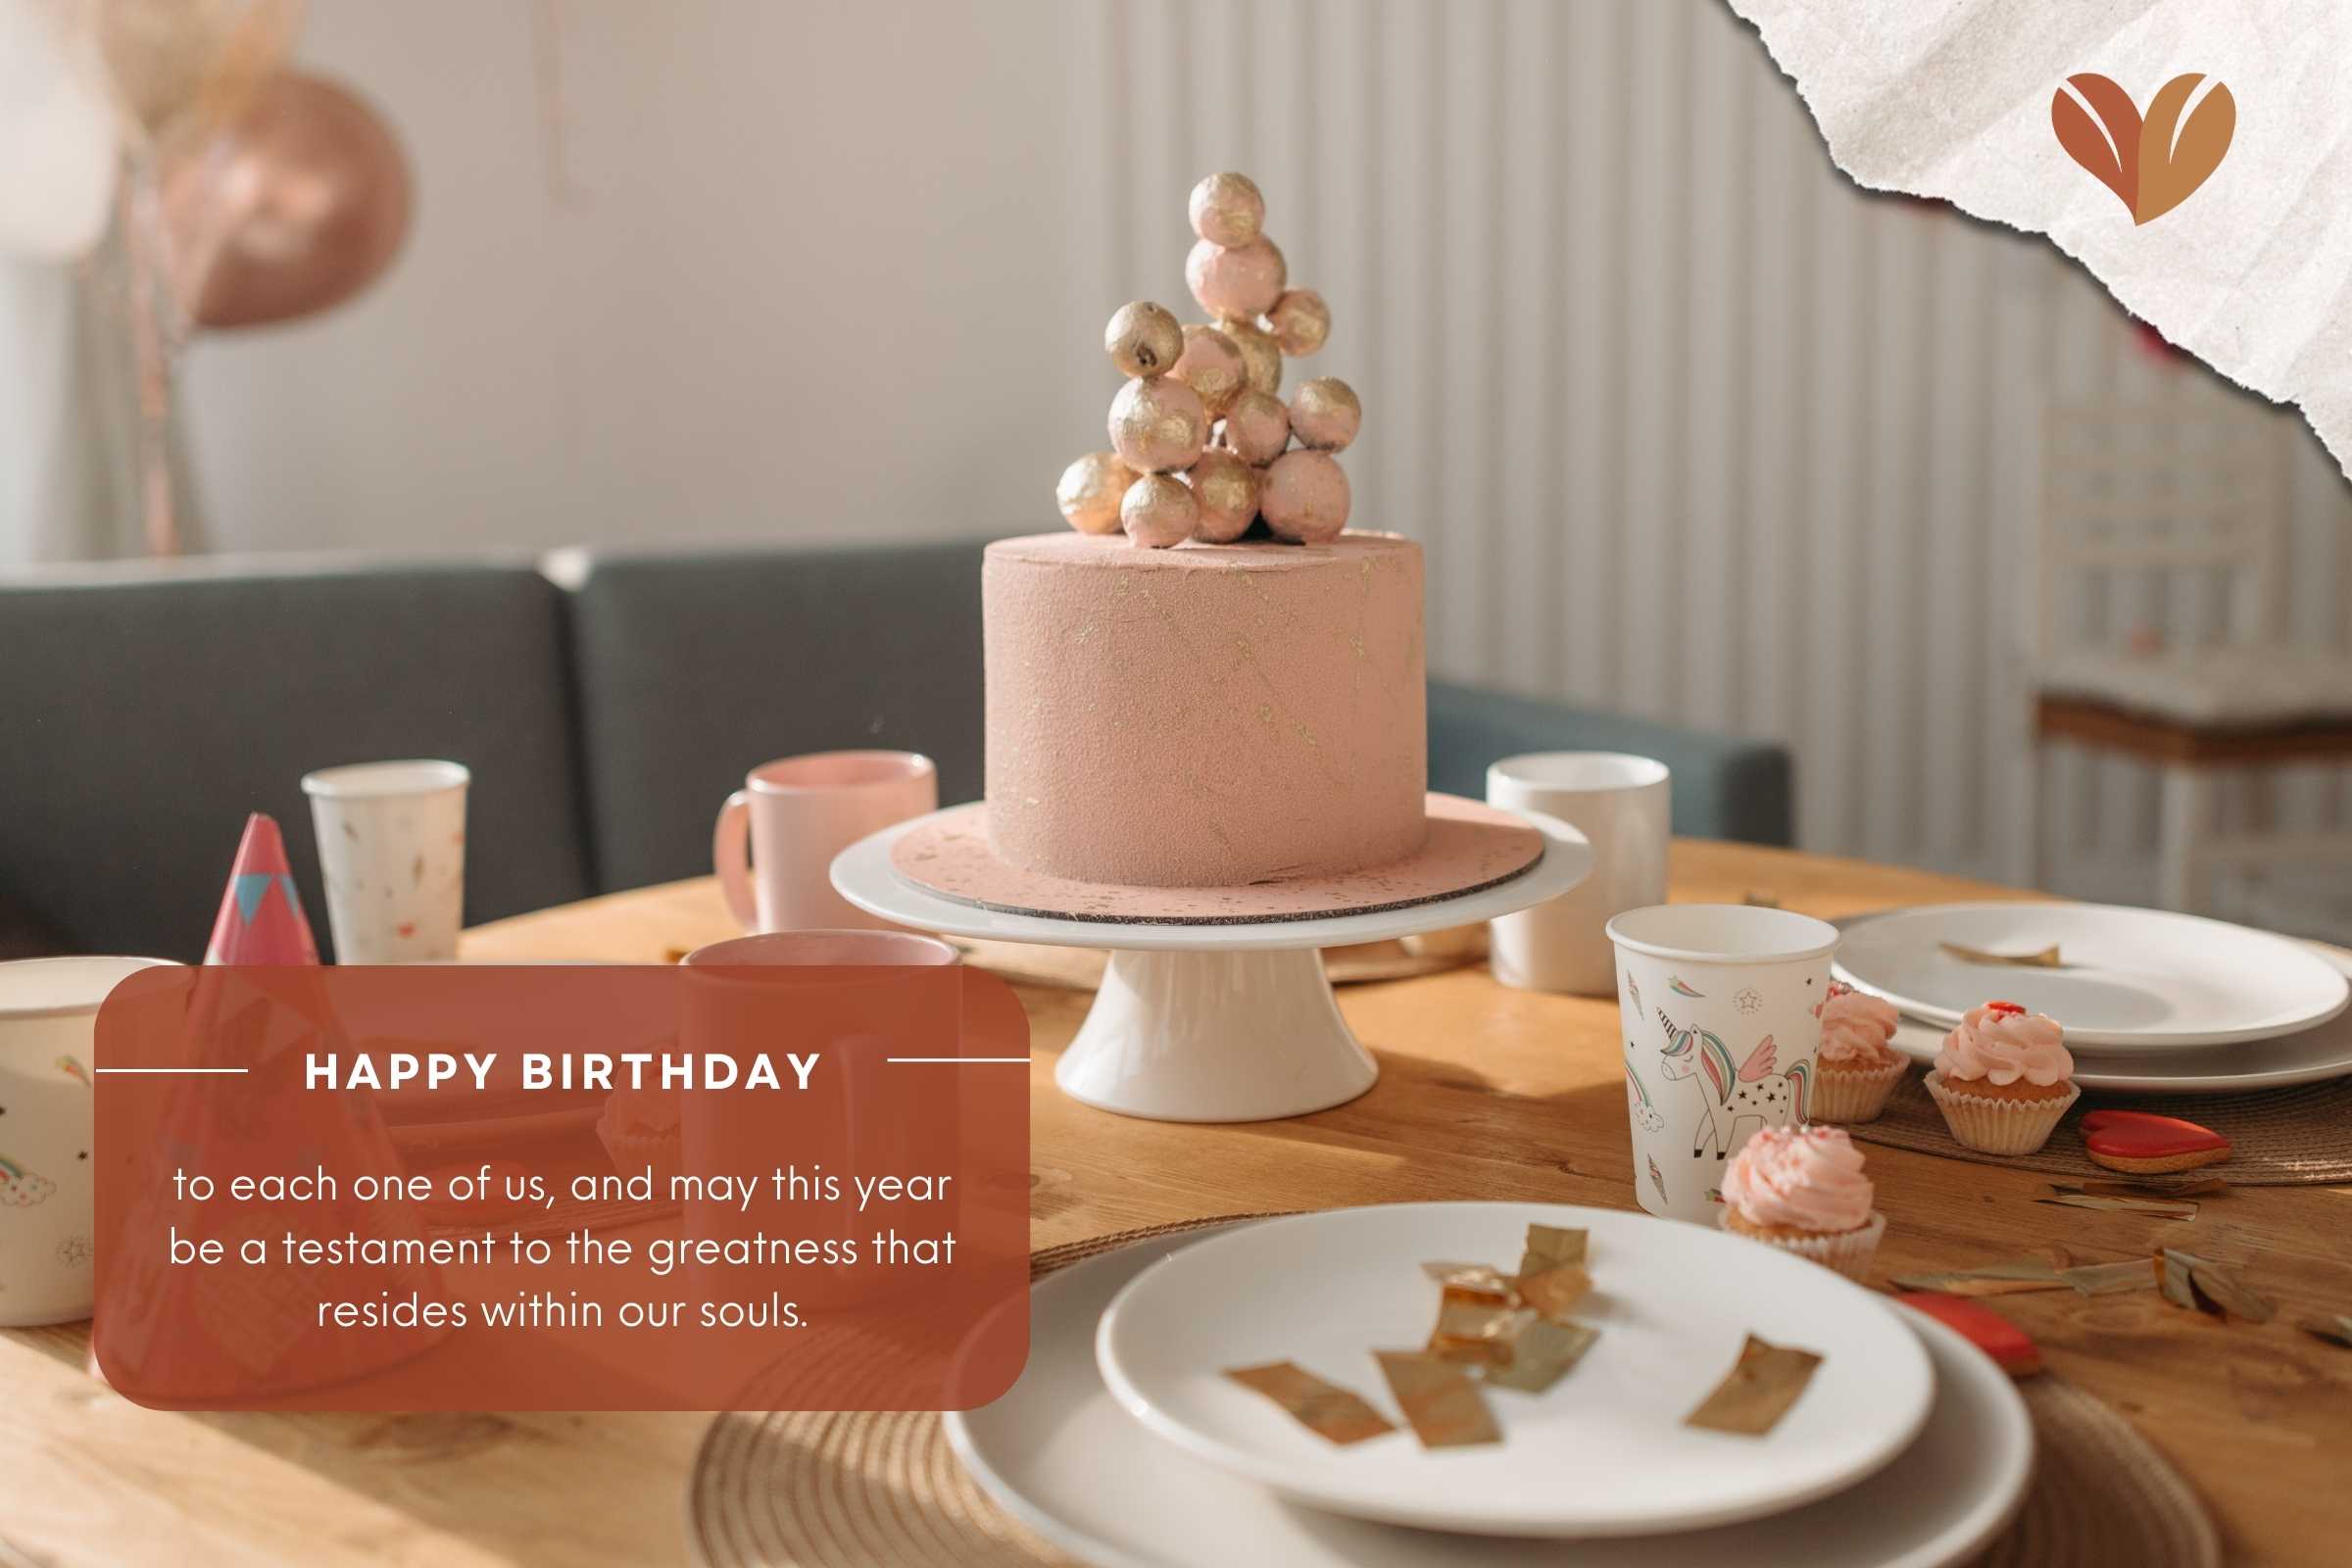 Capture the moment, capturing dreams with vivid birthday wishes for yourself.